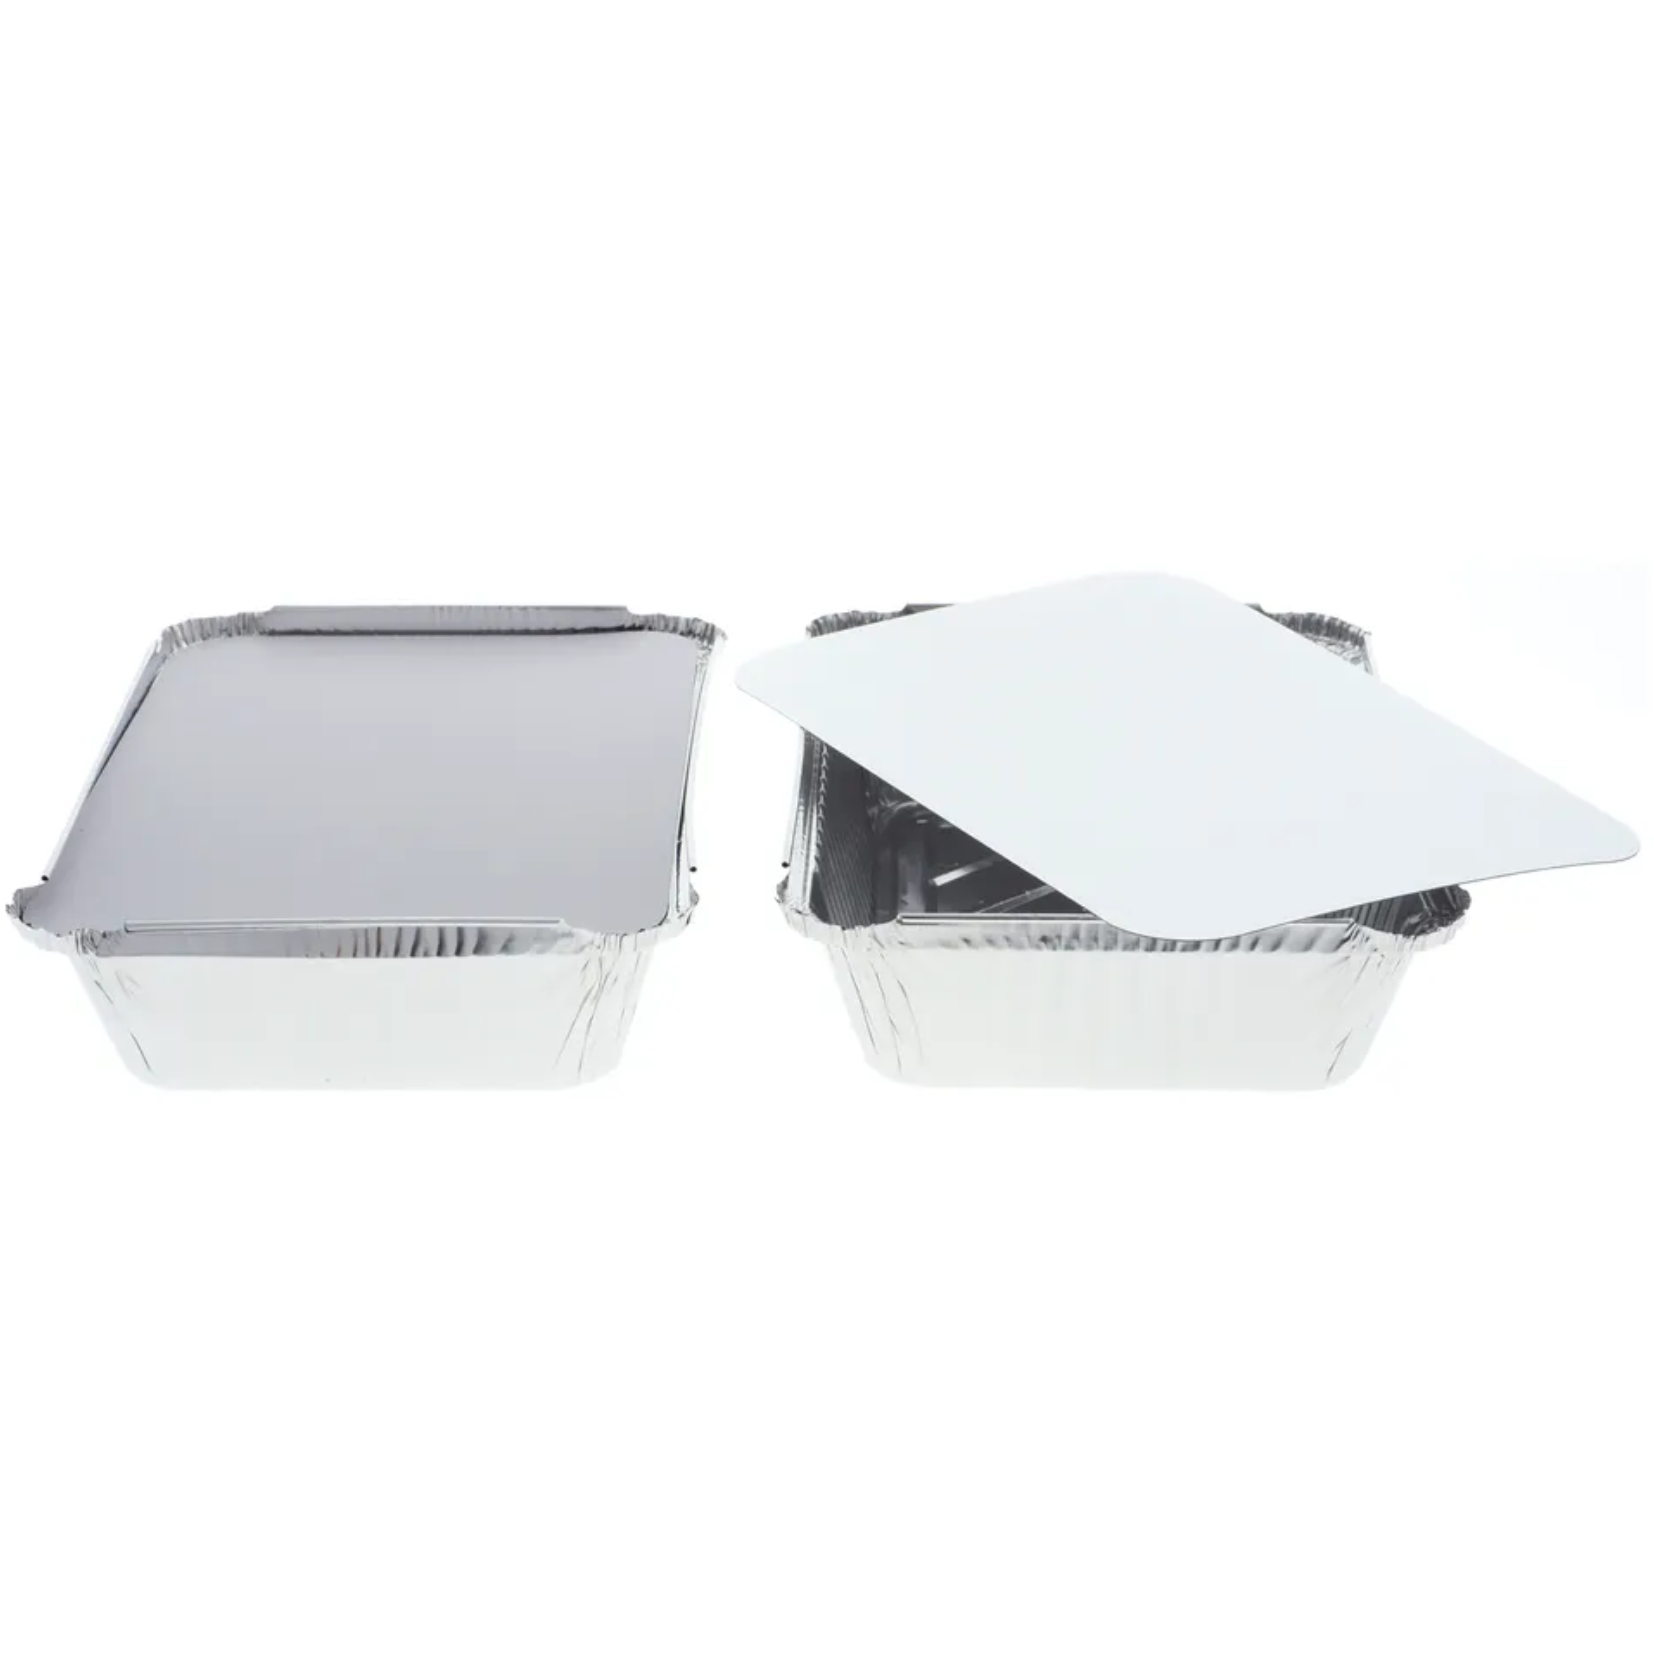 Betty Crocker 3lb Foil Containers and Lids 2ct